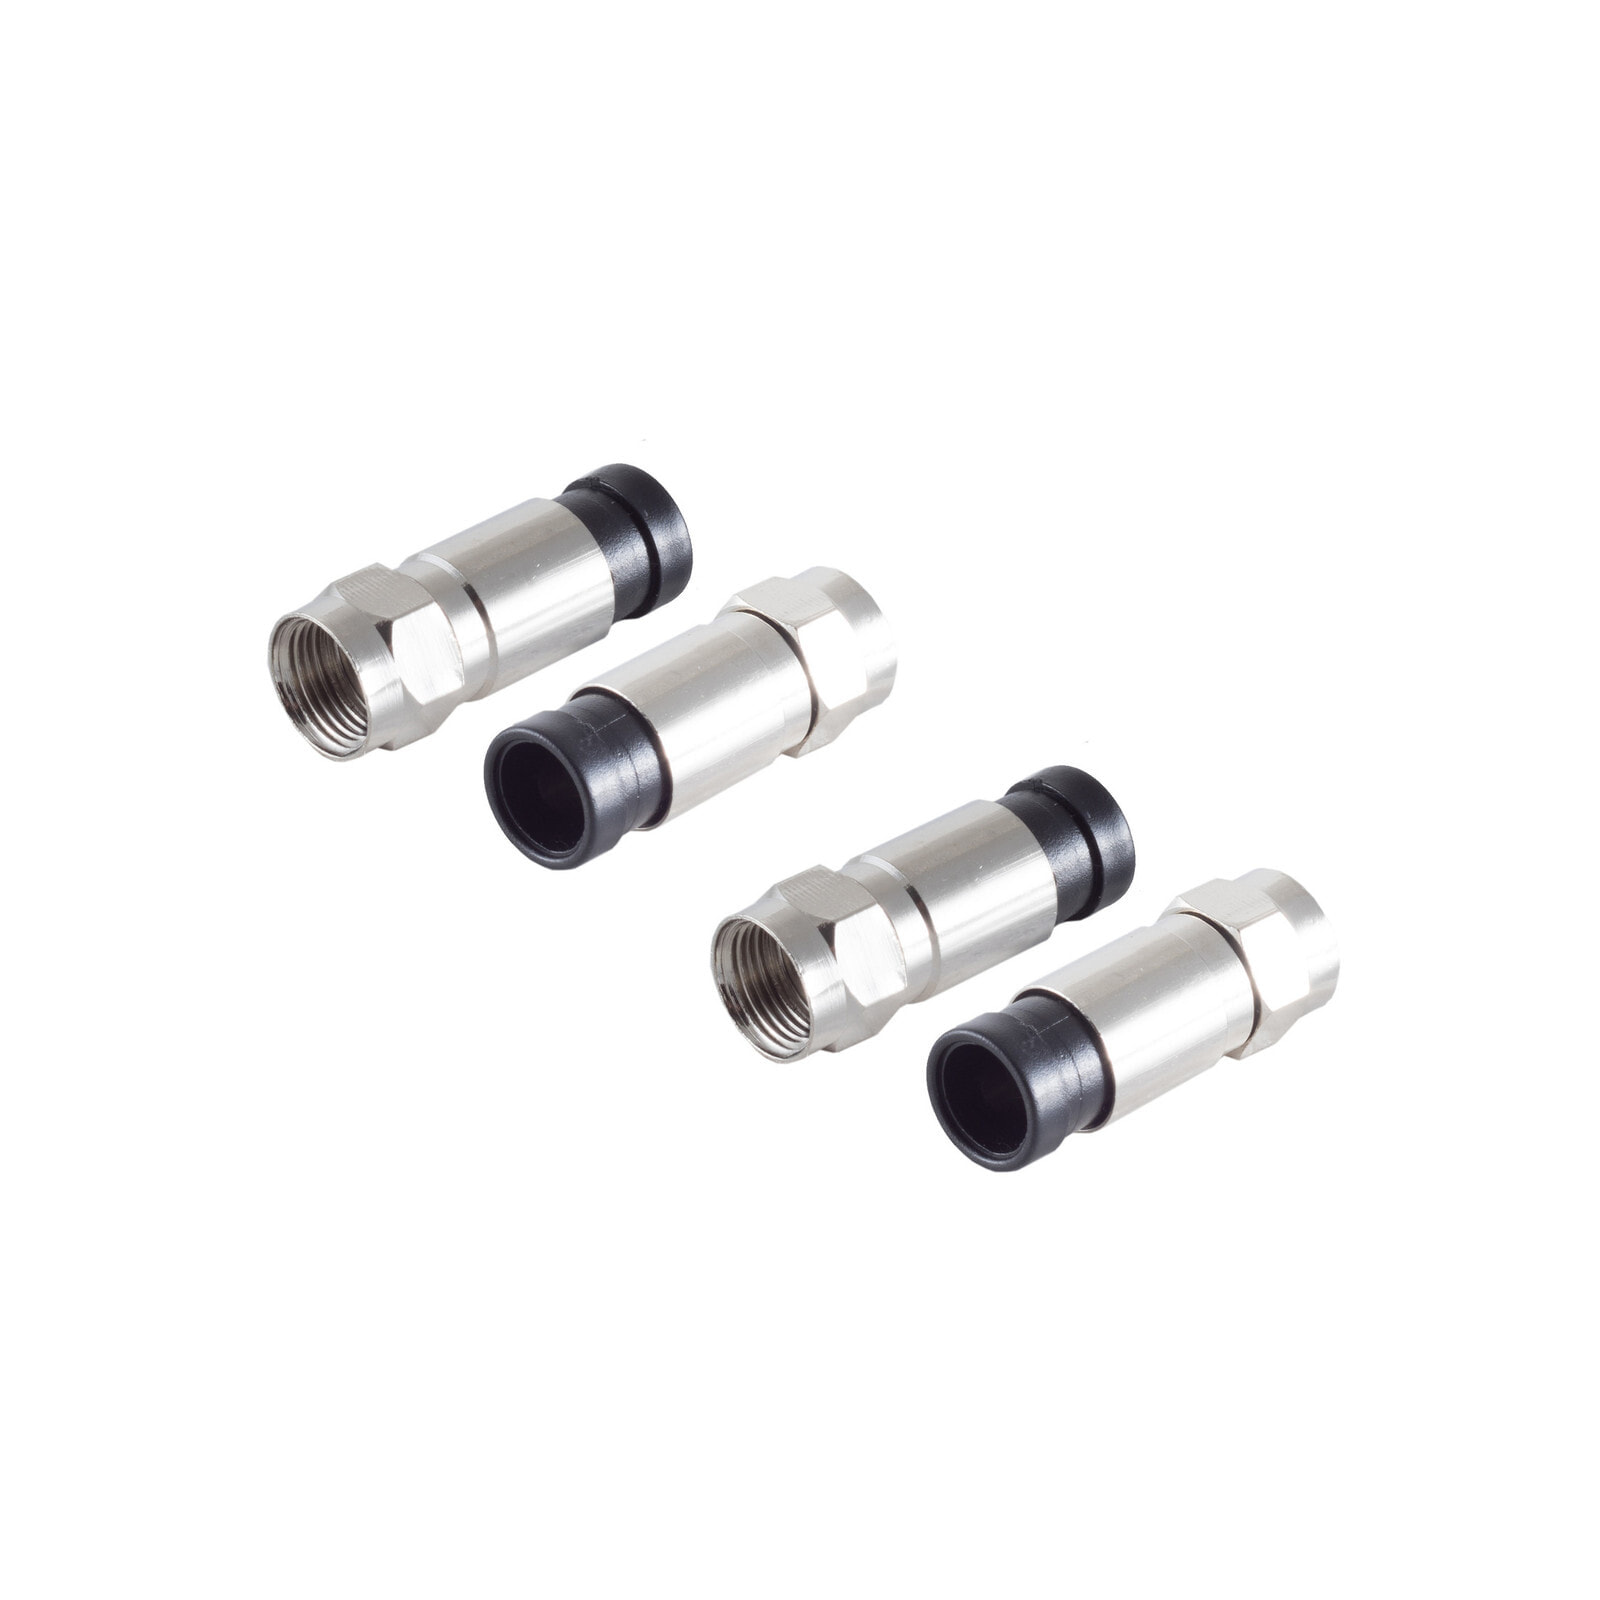 ShiverPeaks BS15-300114 - F-type - F - F - 7 mm - Stainless steel - 2 pc(s)